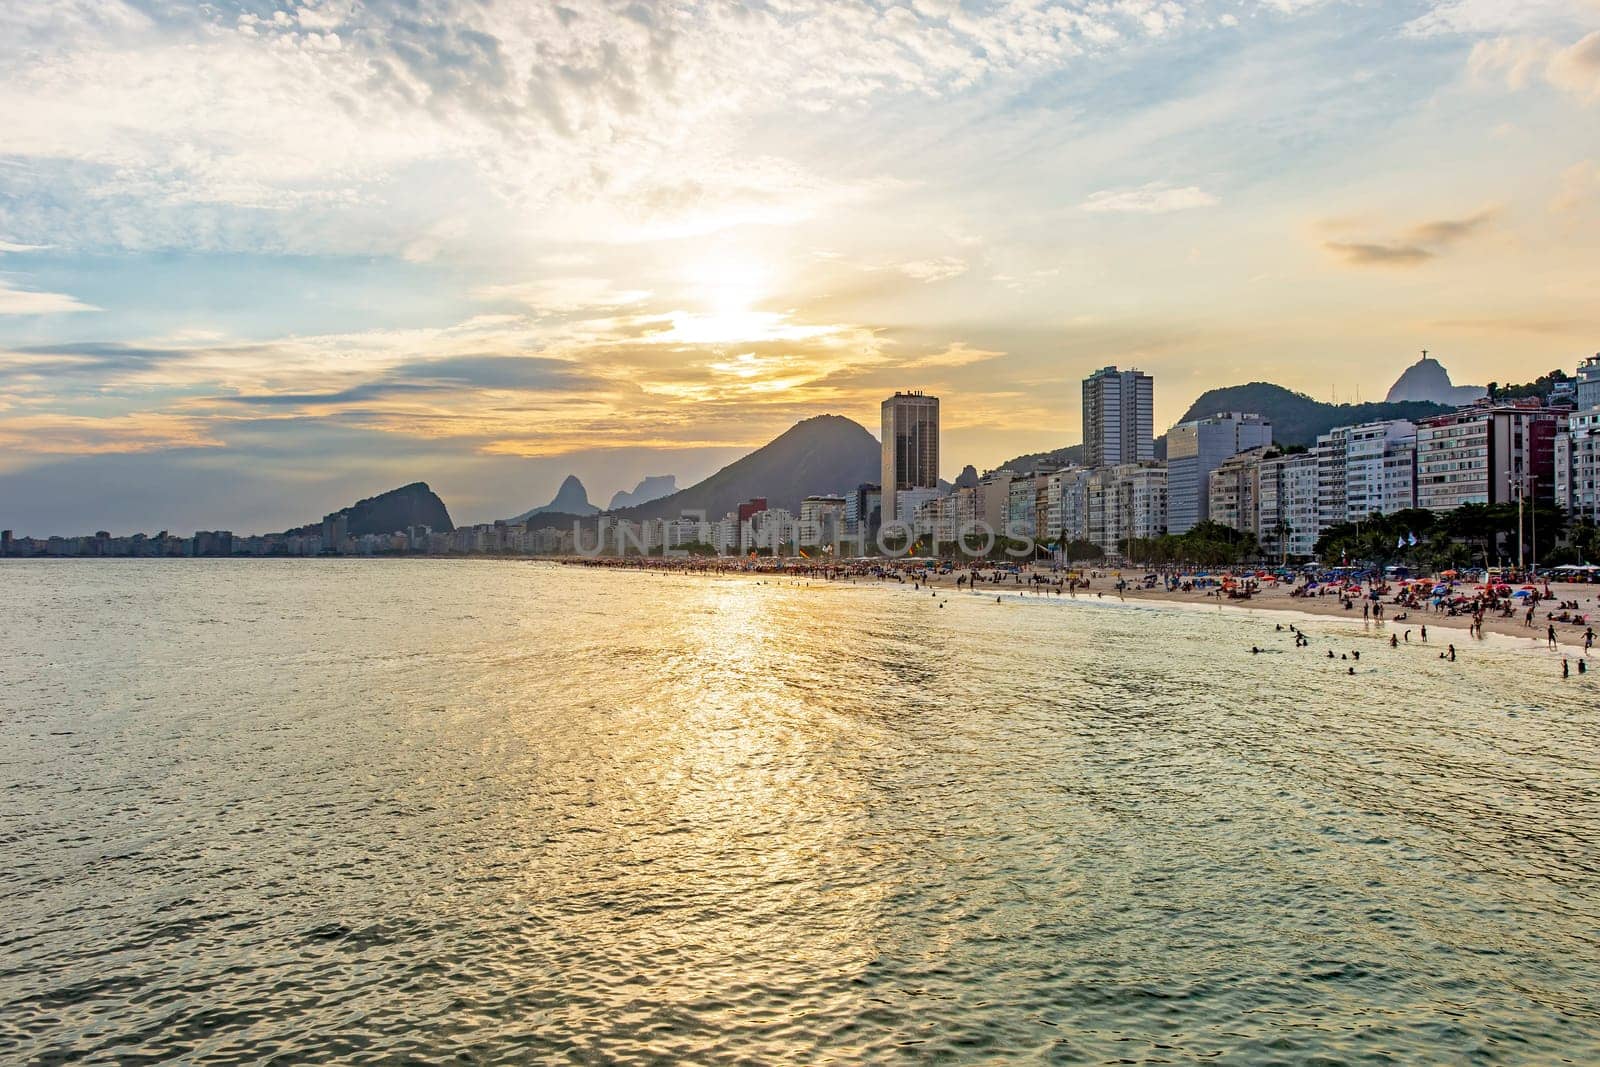 Sunset on the famous Copacabana beach by Fred_Pinheiro